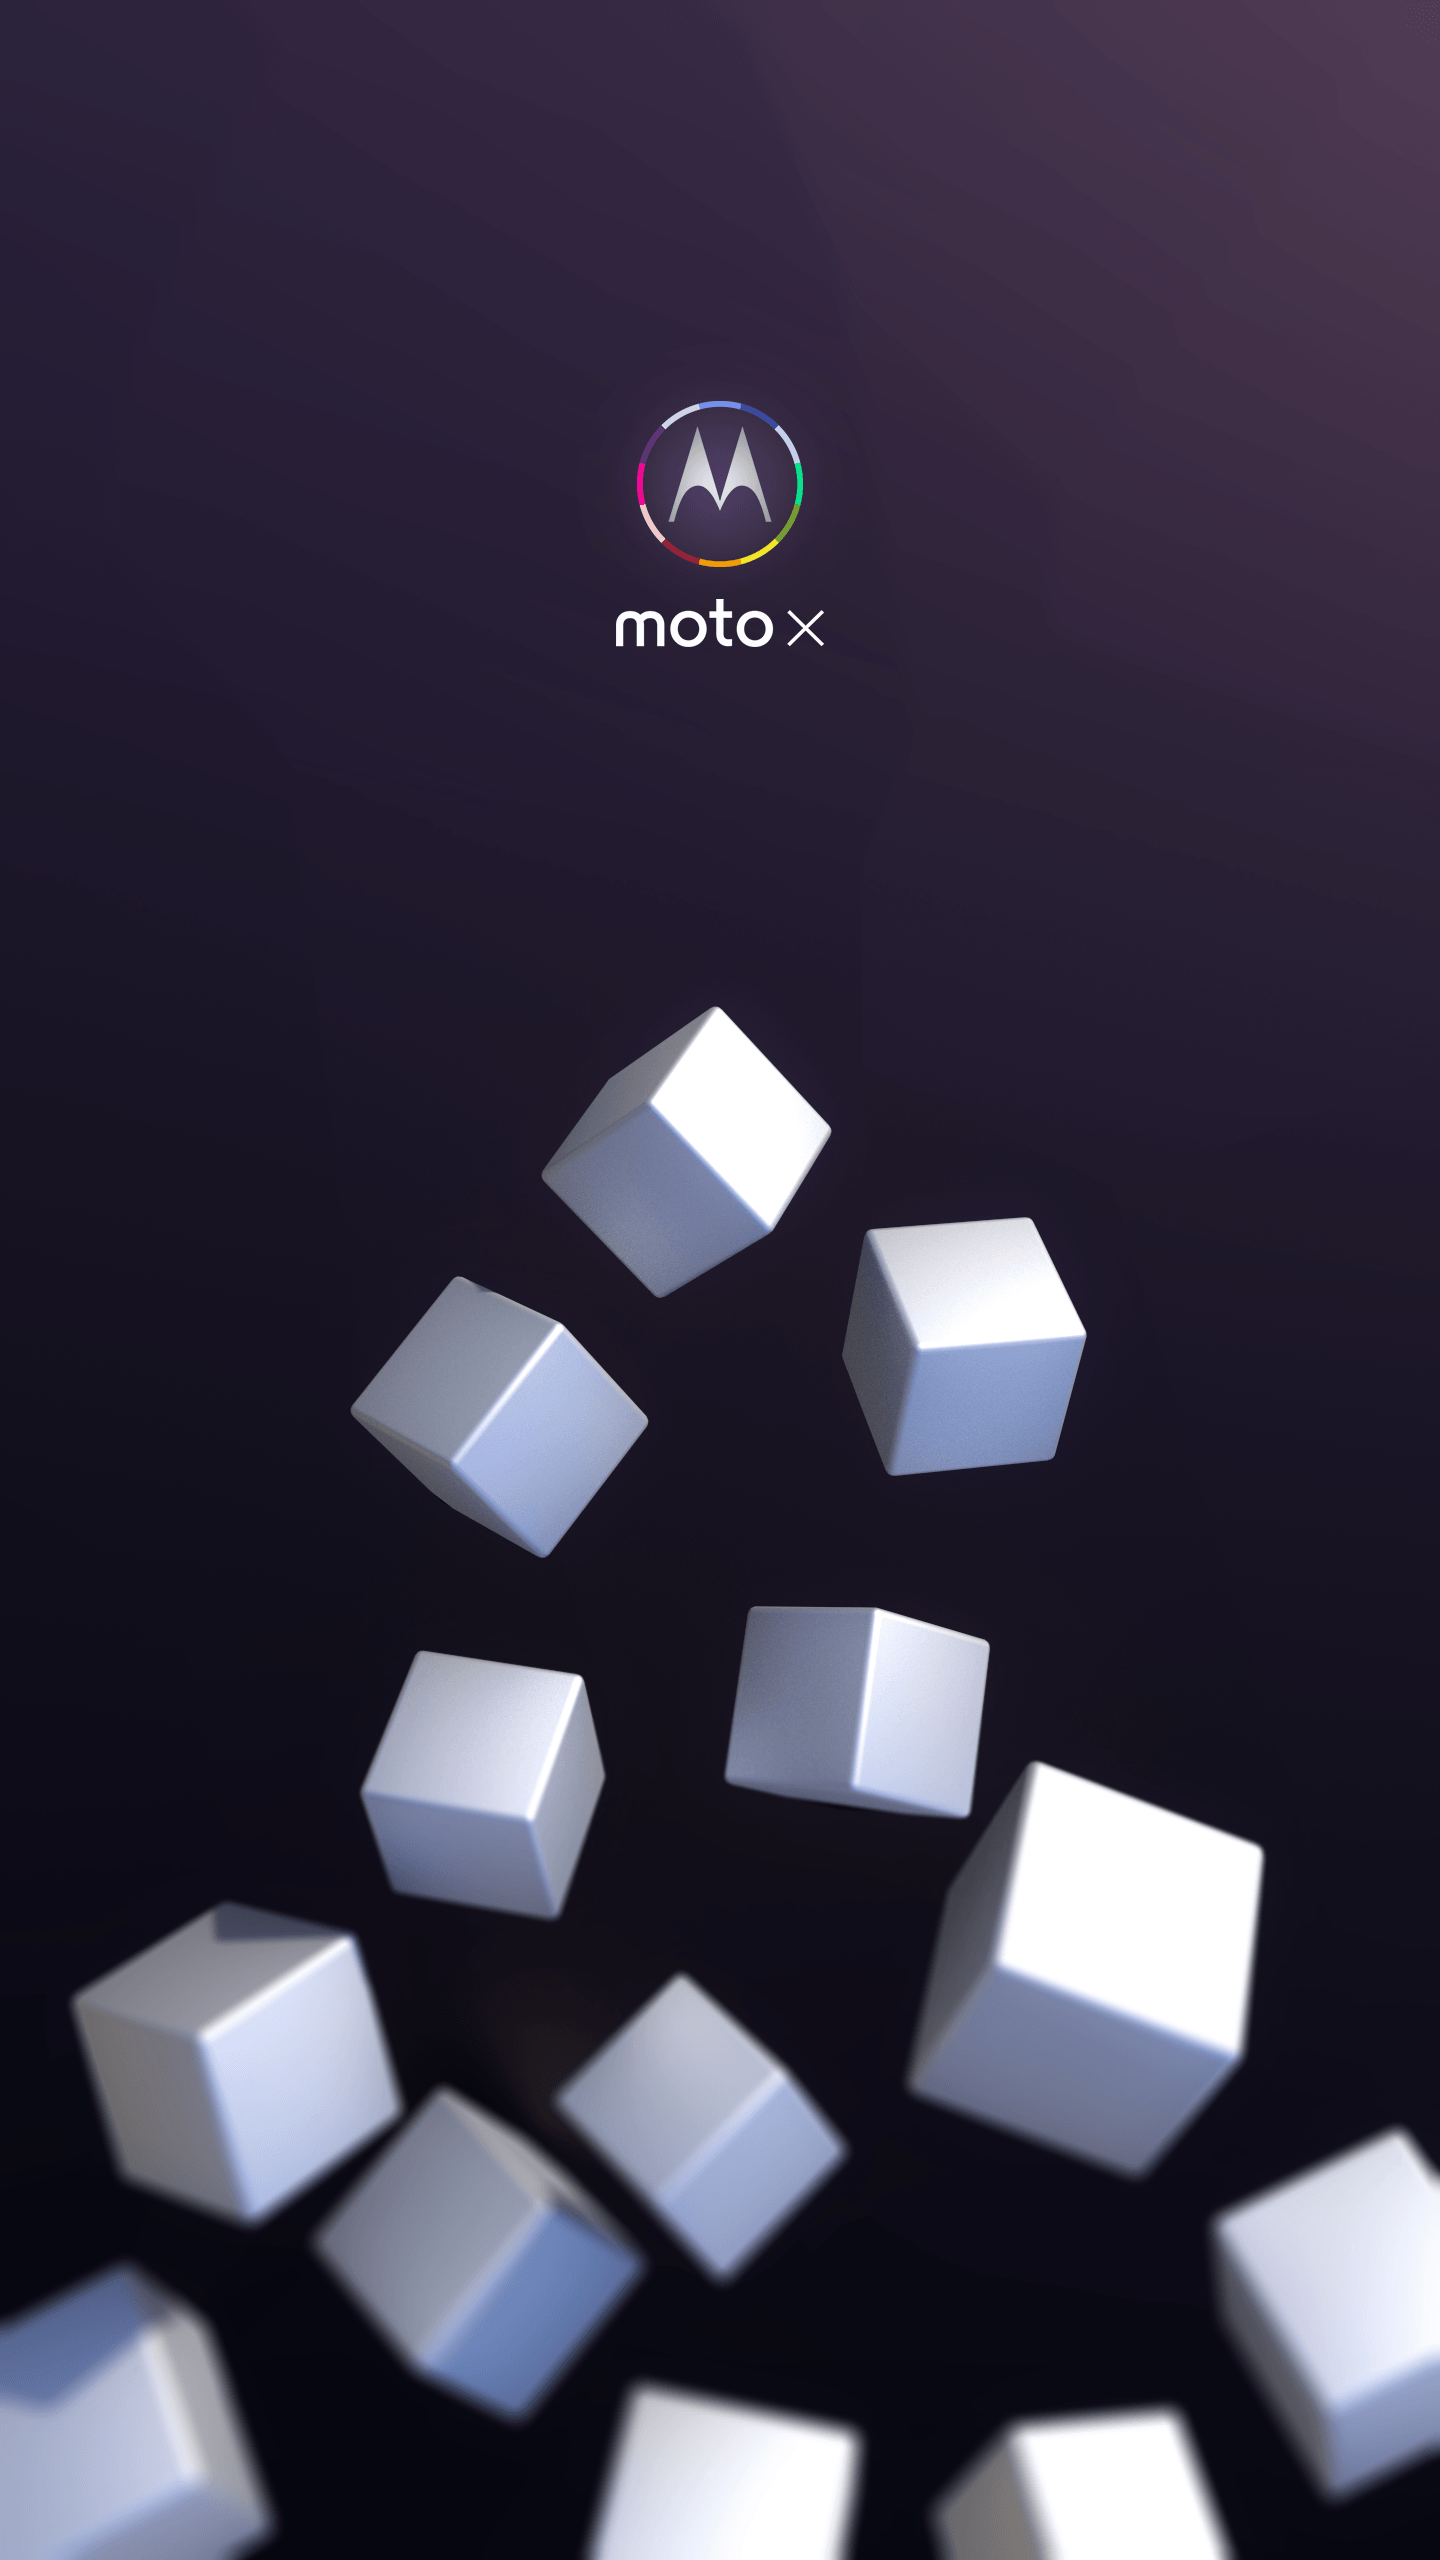 I made a wallpaper for the new Moto X once I get it, but you guys can feel free to use it as well